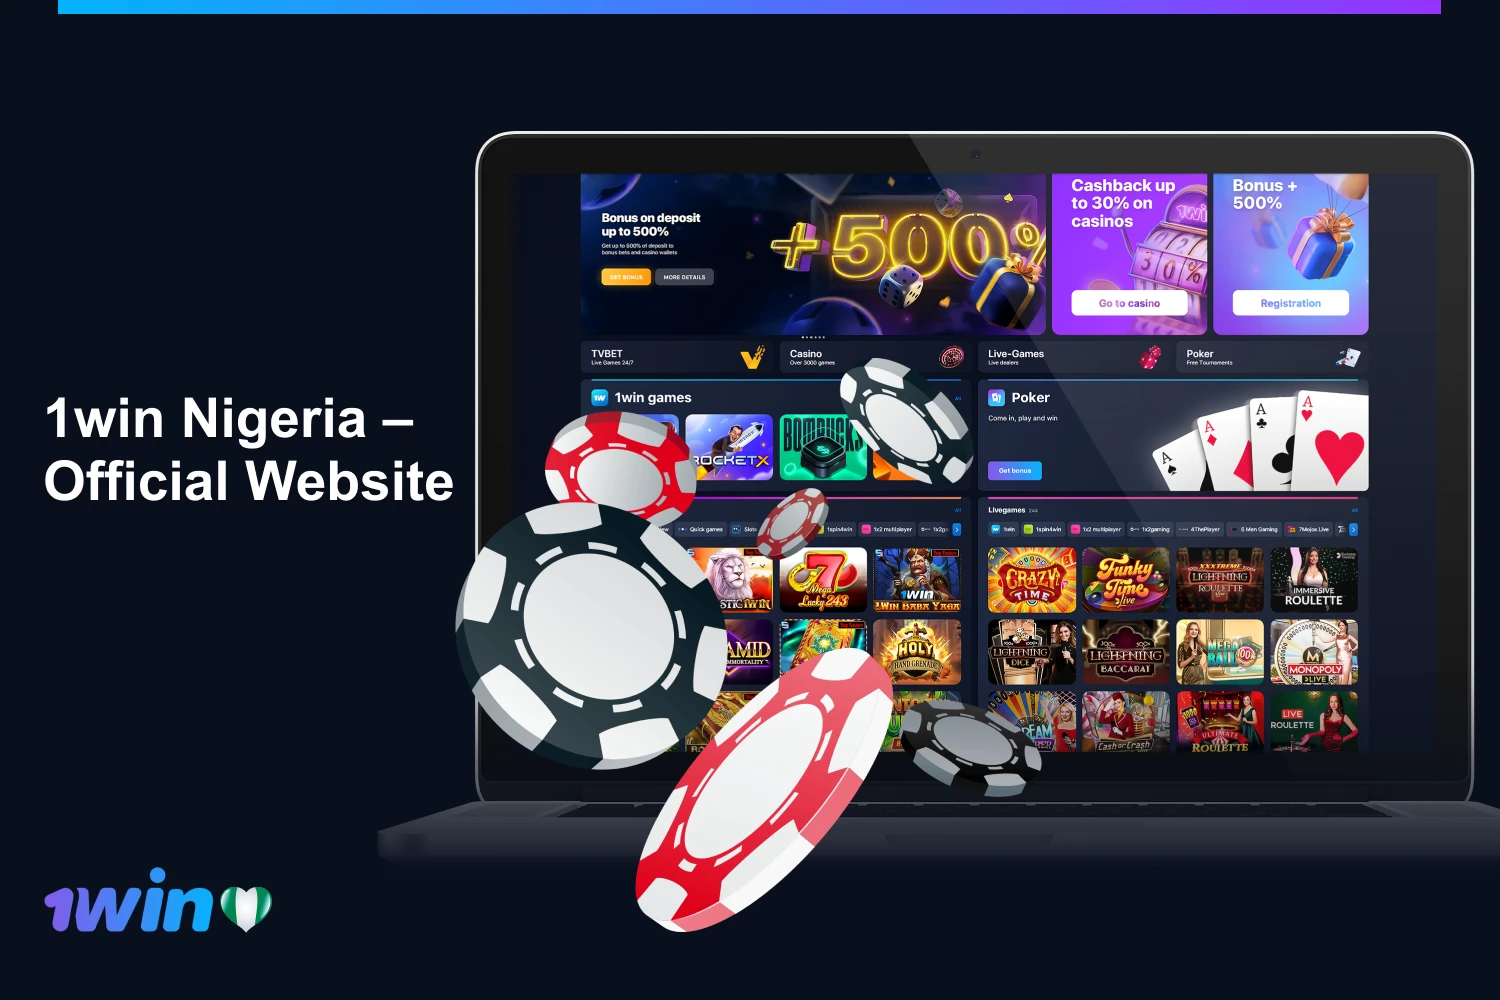 1win is an official sports betting site that provides Nigerian players with betting opportunities